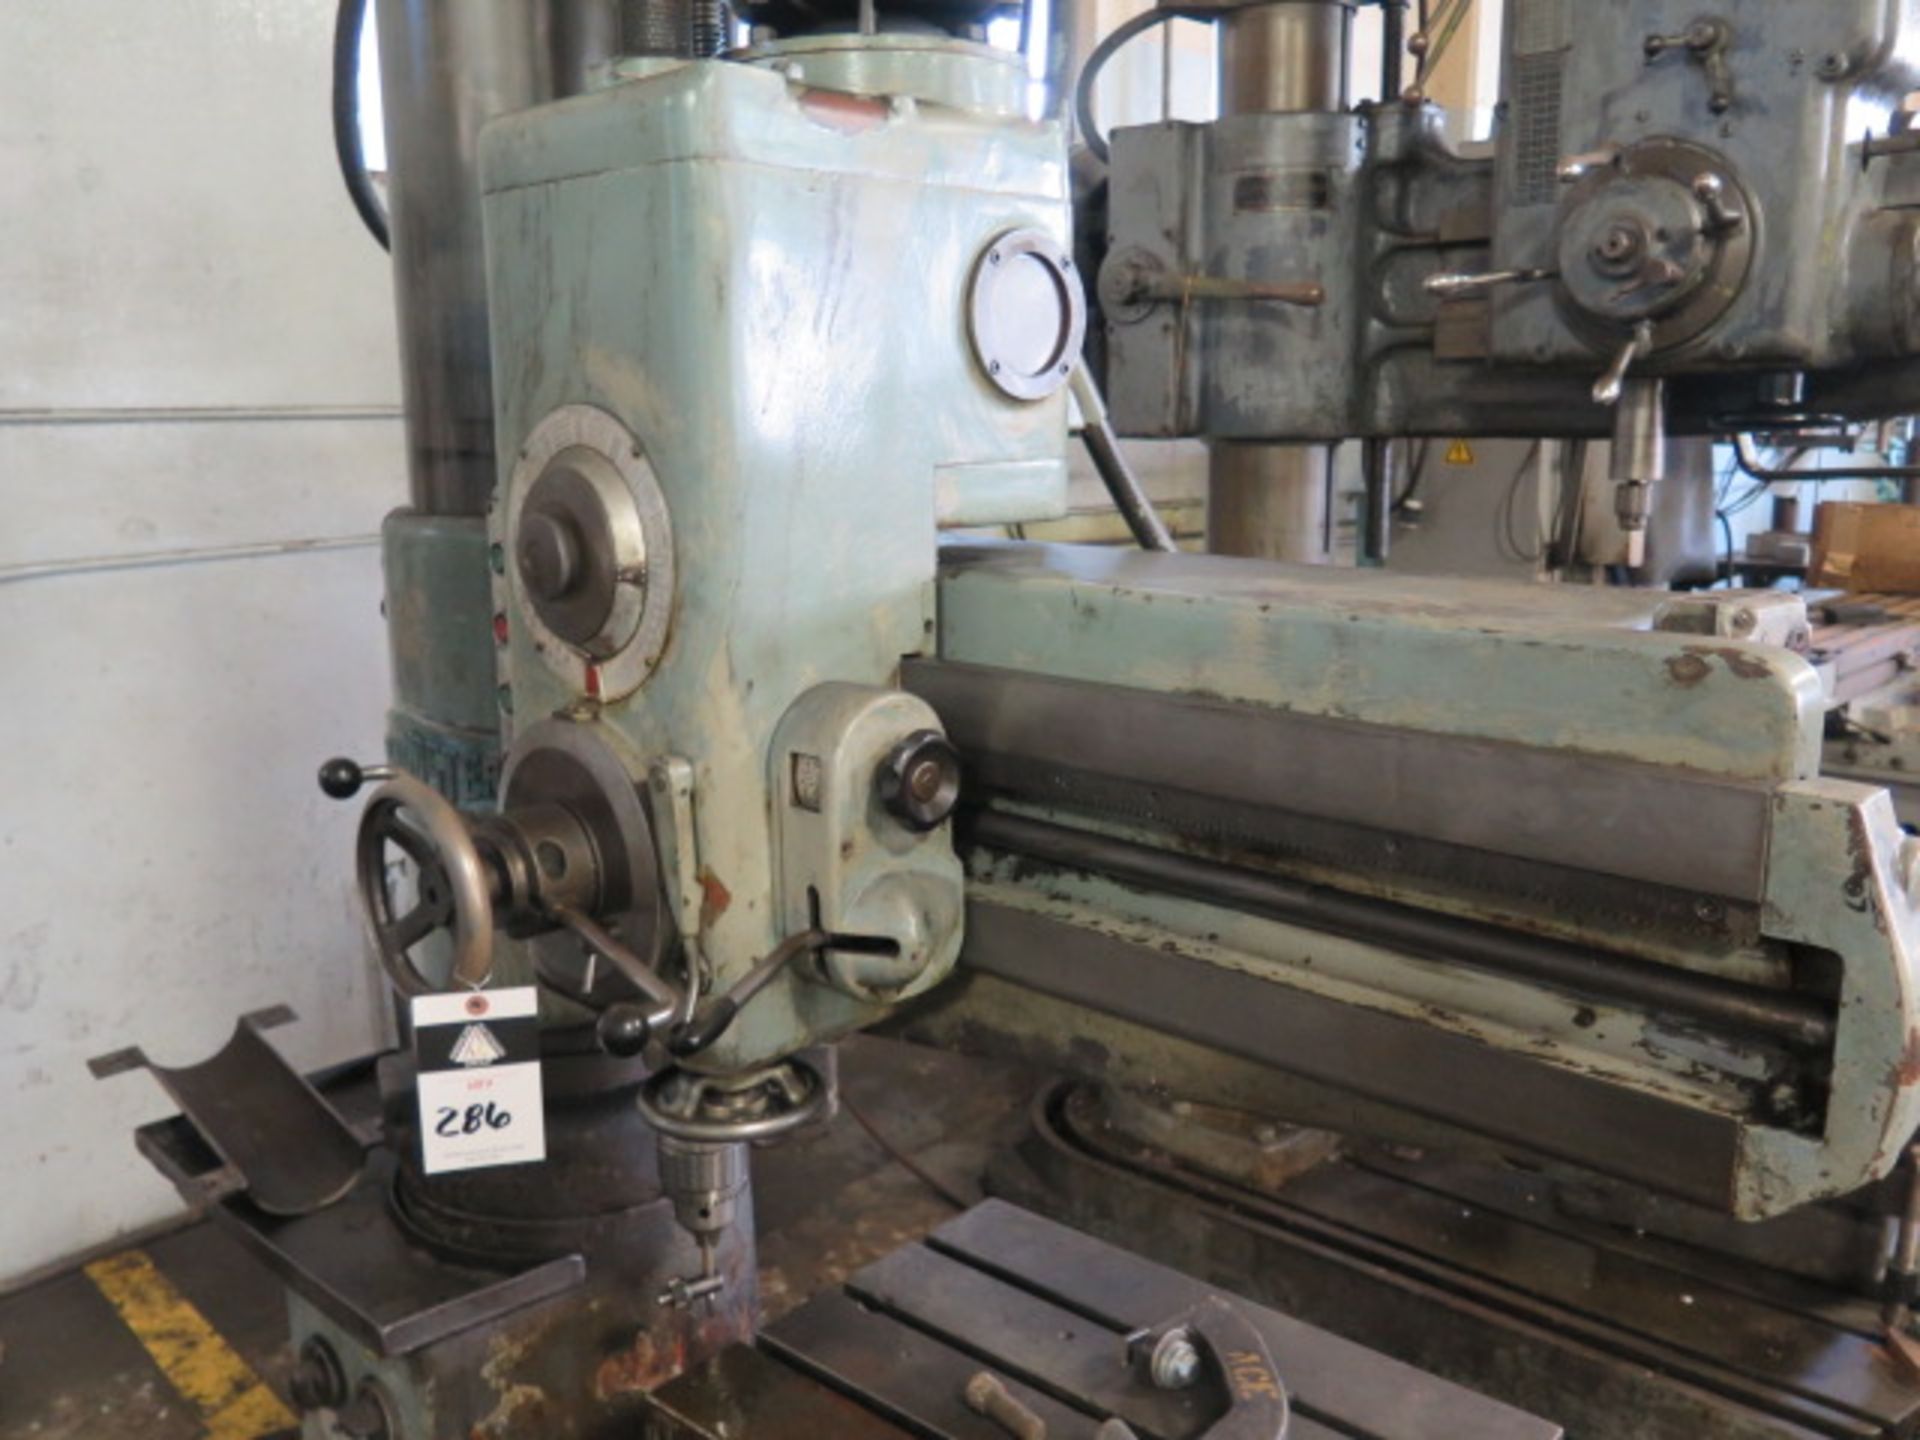 Speedmaster 9” Column x 24” Radial Arm Drill w/ 61-2100 RPM, Power Column and Feeds, SOLD AS IS - Image 3 of 8